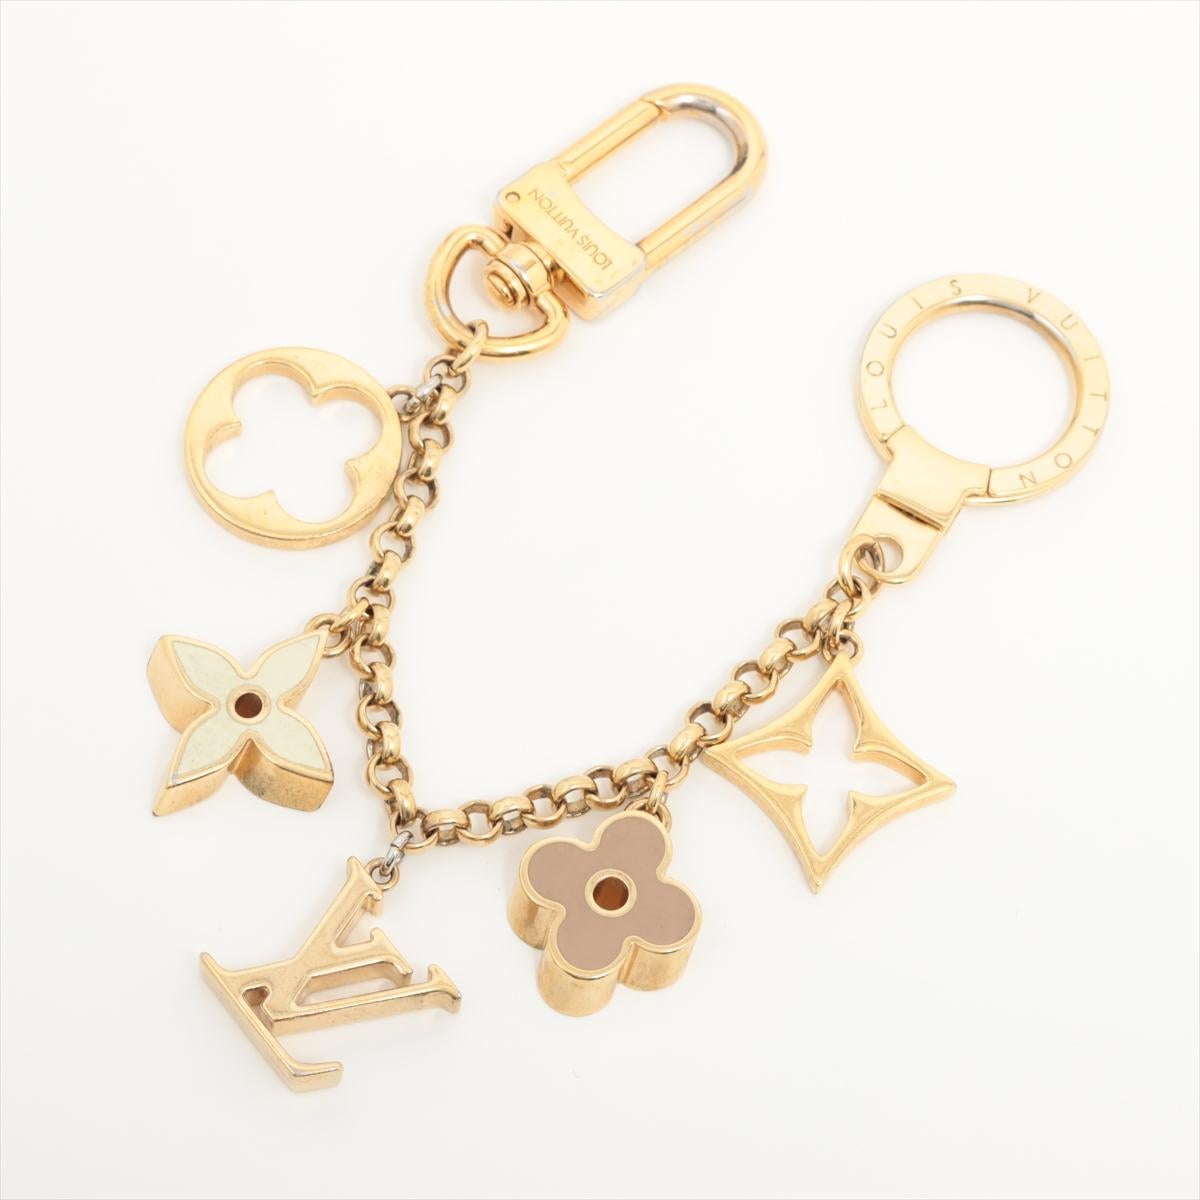 The Louis Vuitton Fleur De Monogram Bag Charm is a stunning accessory that adds a touch of elegance and luxury to your handbag or keys. The intricate details of the flower petals and the gold-tone hardware showcase the exquisite craftsmanship and